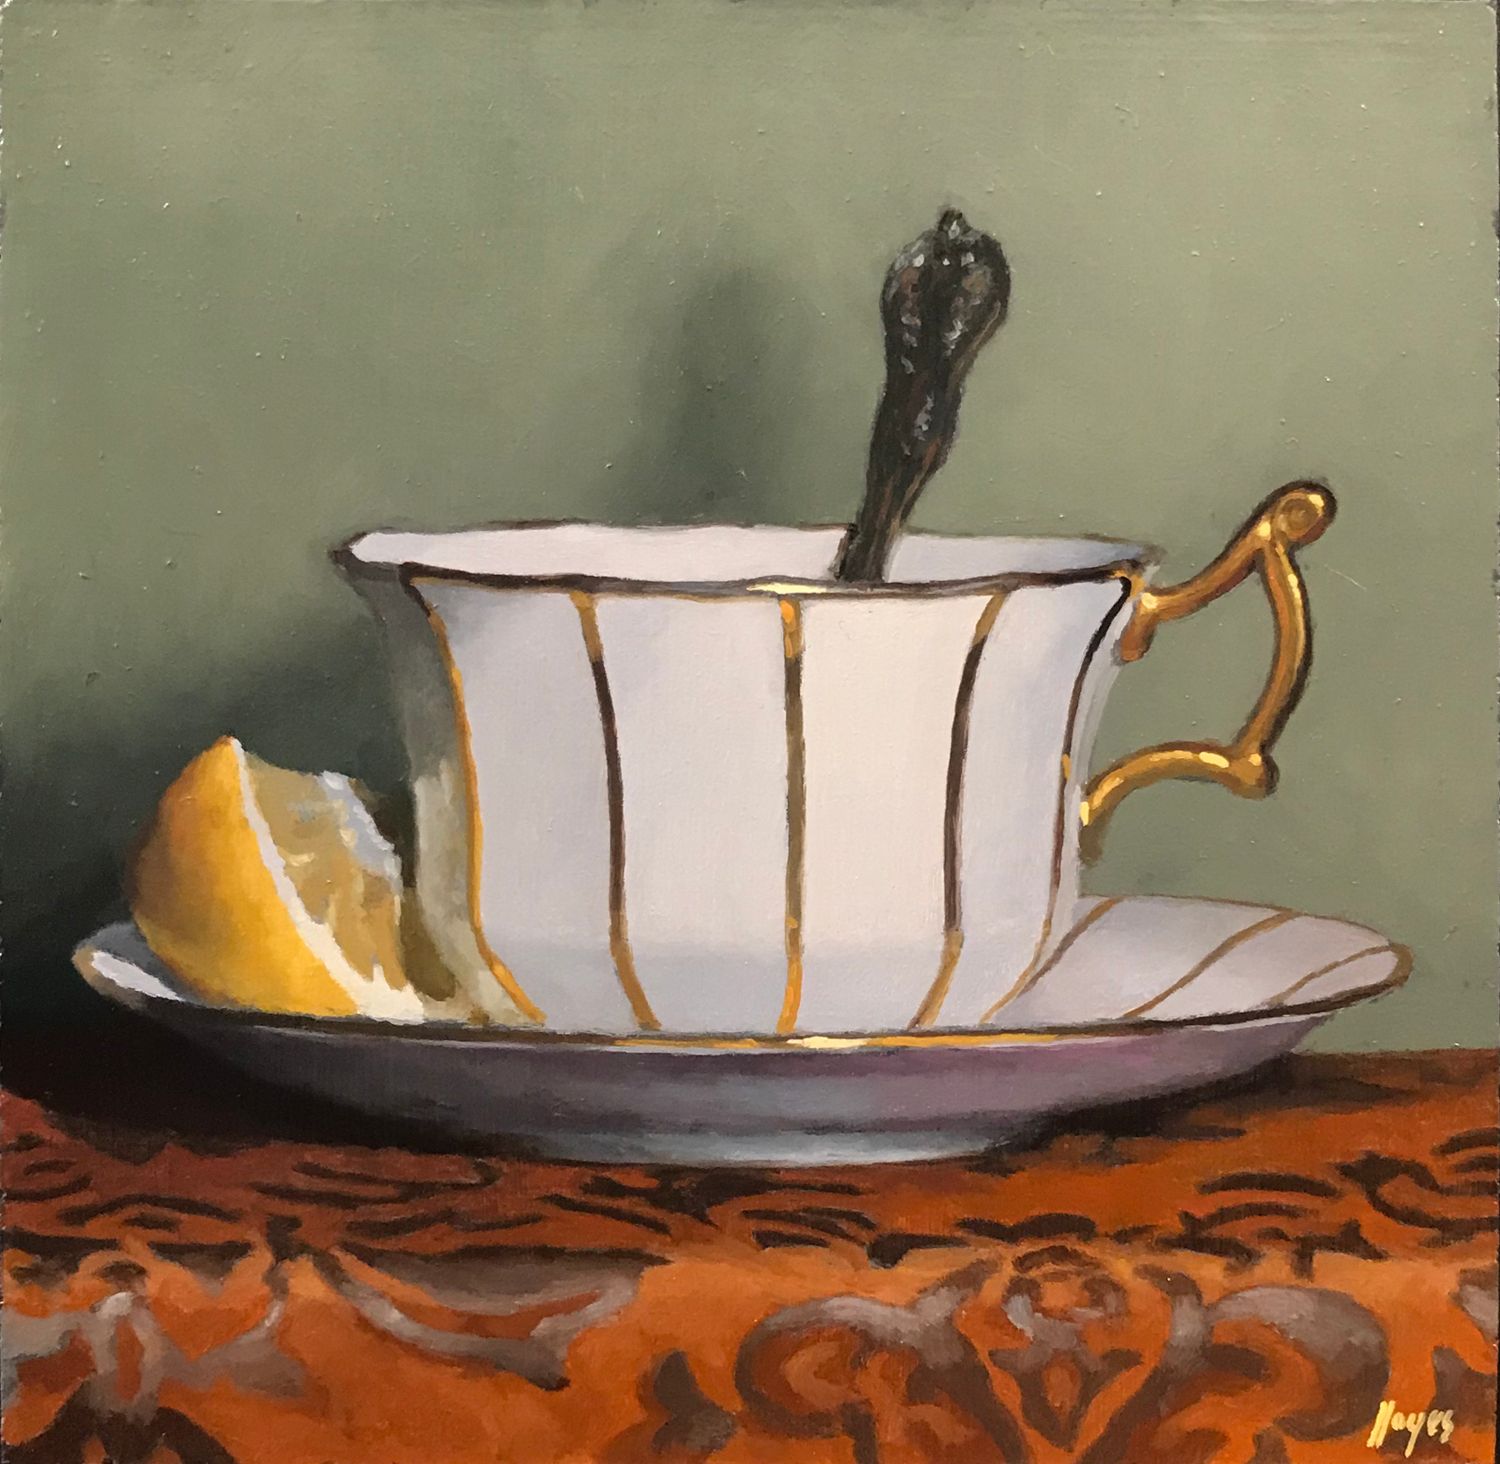 "Teacup and Lemon on Red Silk", oil on panel, 5x5 inches